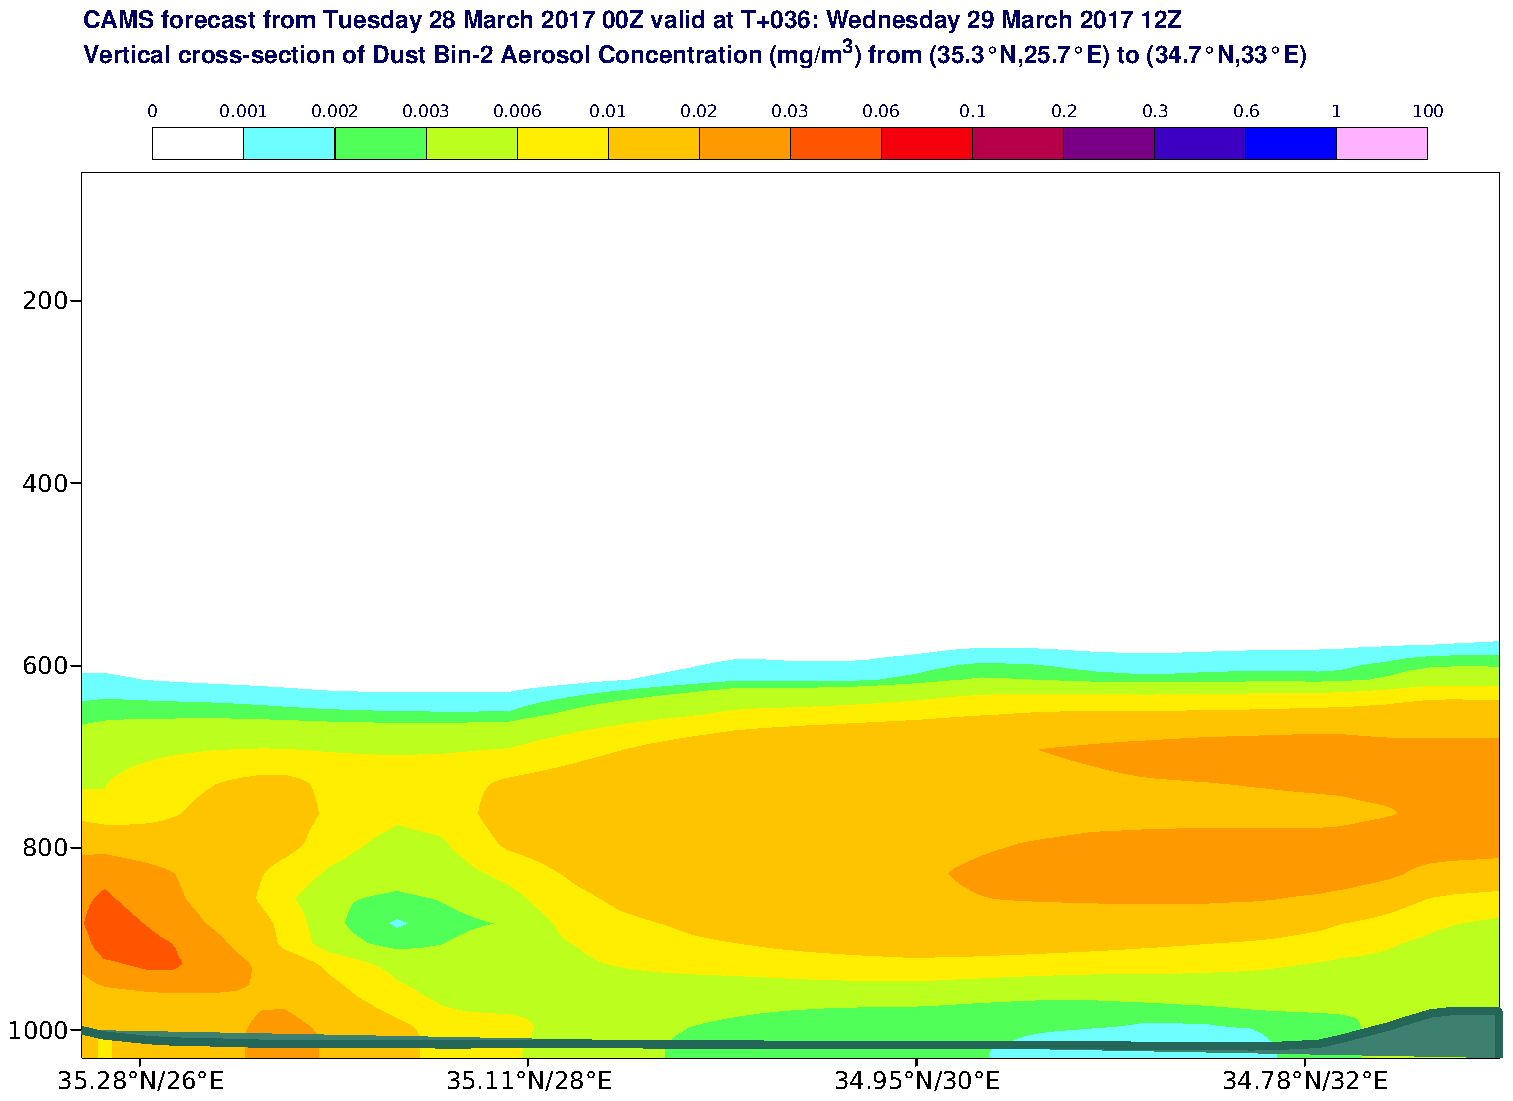 Vertical cross-section of Dust Bin-2 Aerosol Concentration (mg/m3) valid at T36 - 2017-03-29 12:00